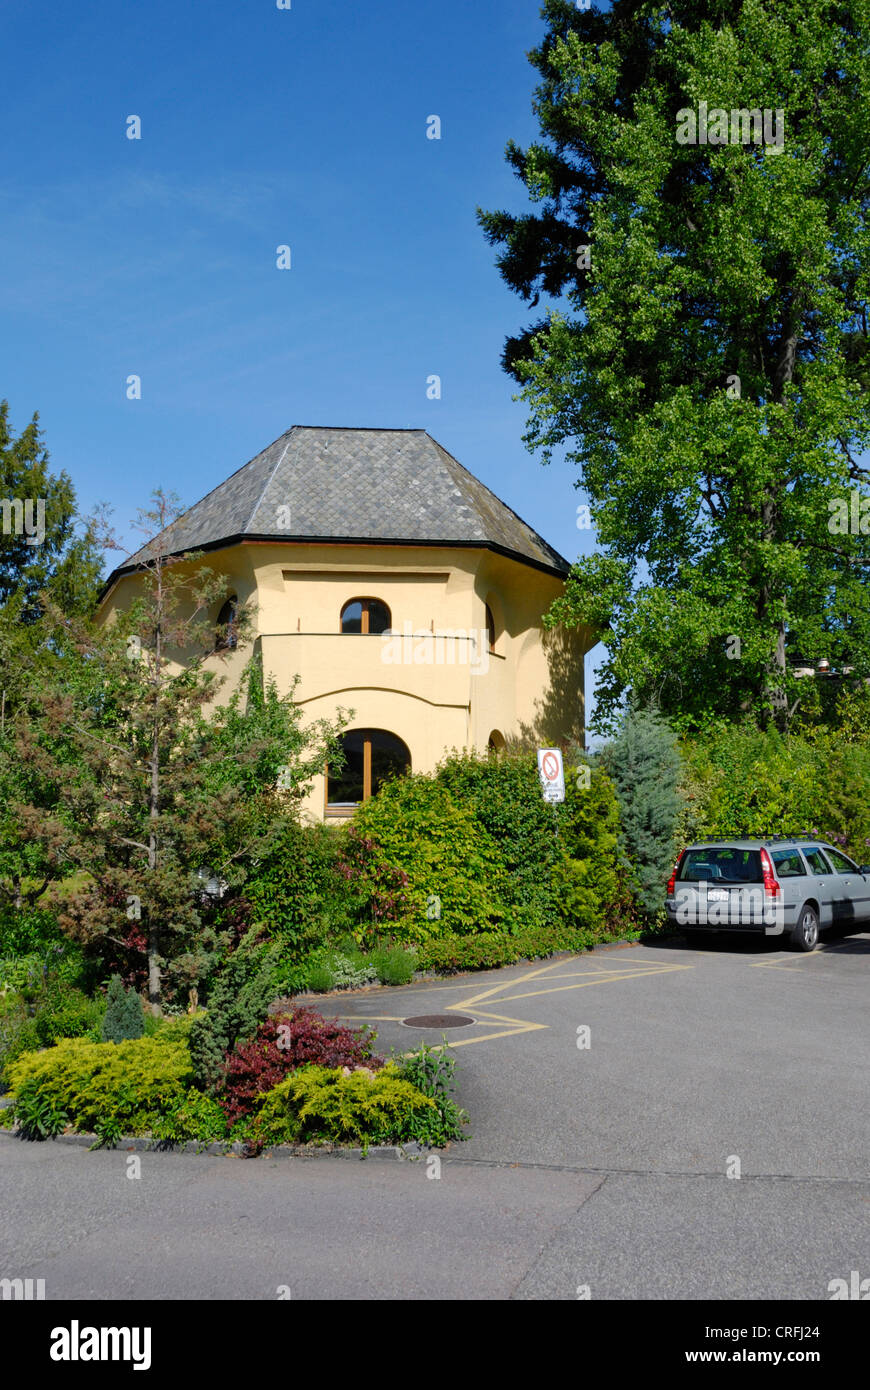 Typical house based on a style created by the philosopher Rudolf Steiner, Dornach near Basel, Switzerland Stock Photo